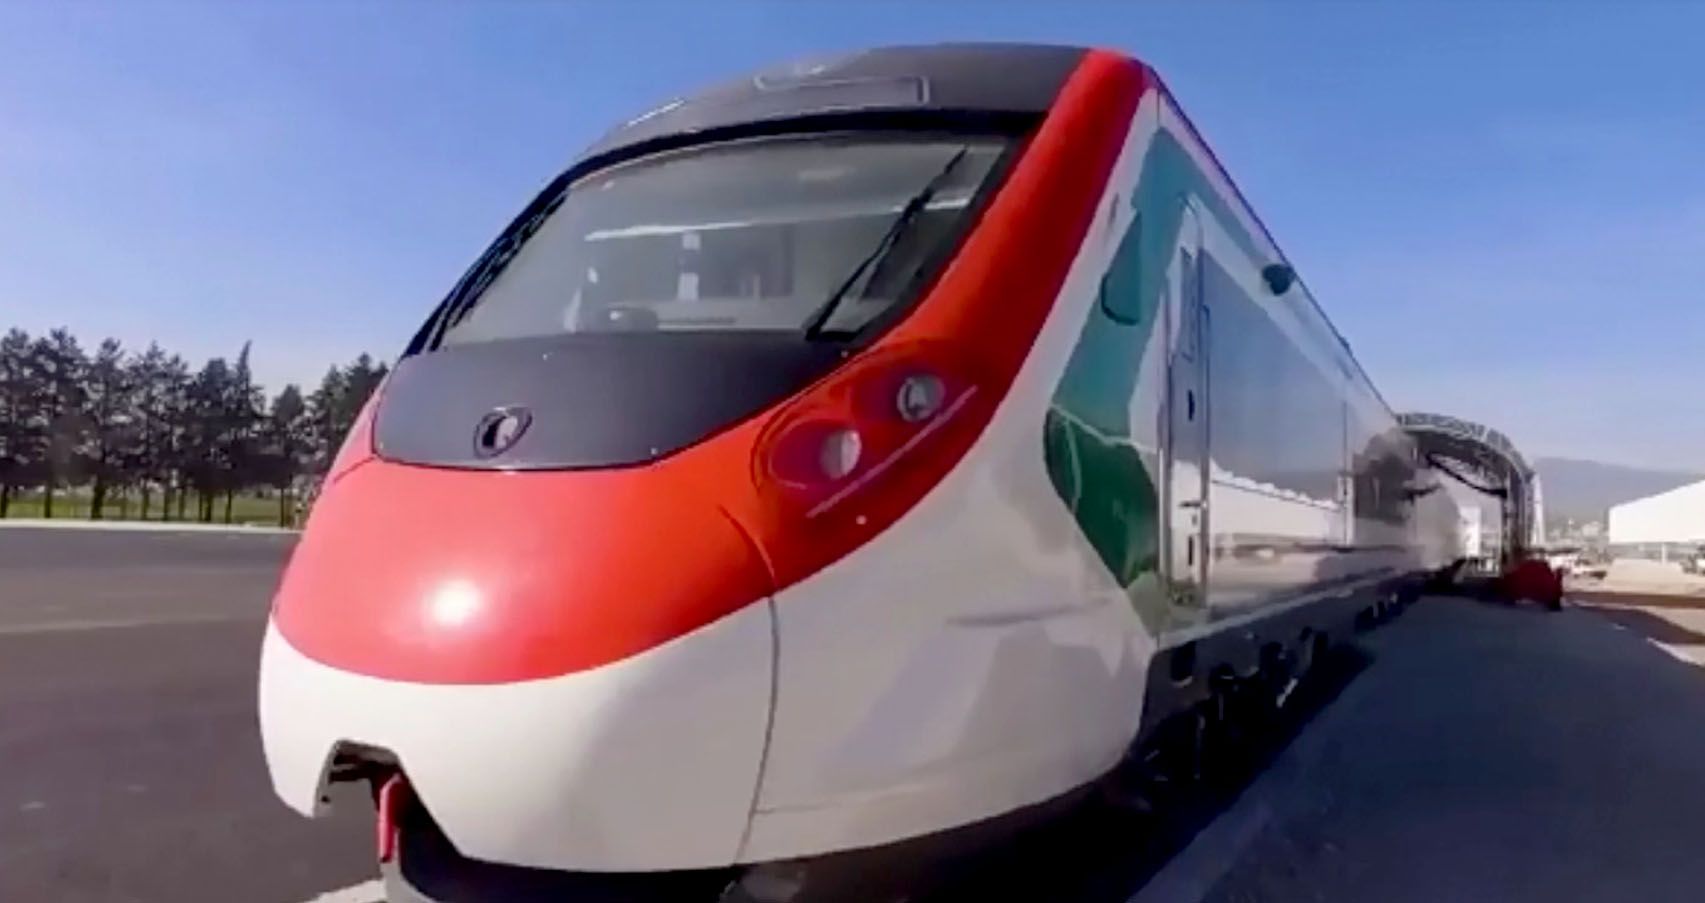 The Ministry of Finance proposed that the Mexico-Toluca Interurban Train have a budget of 7,000 million pesos for fiscal year 2021.